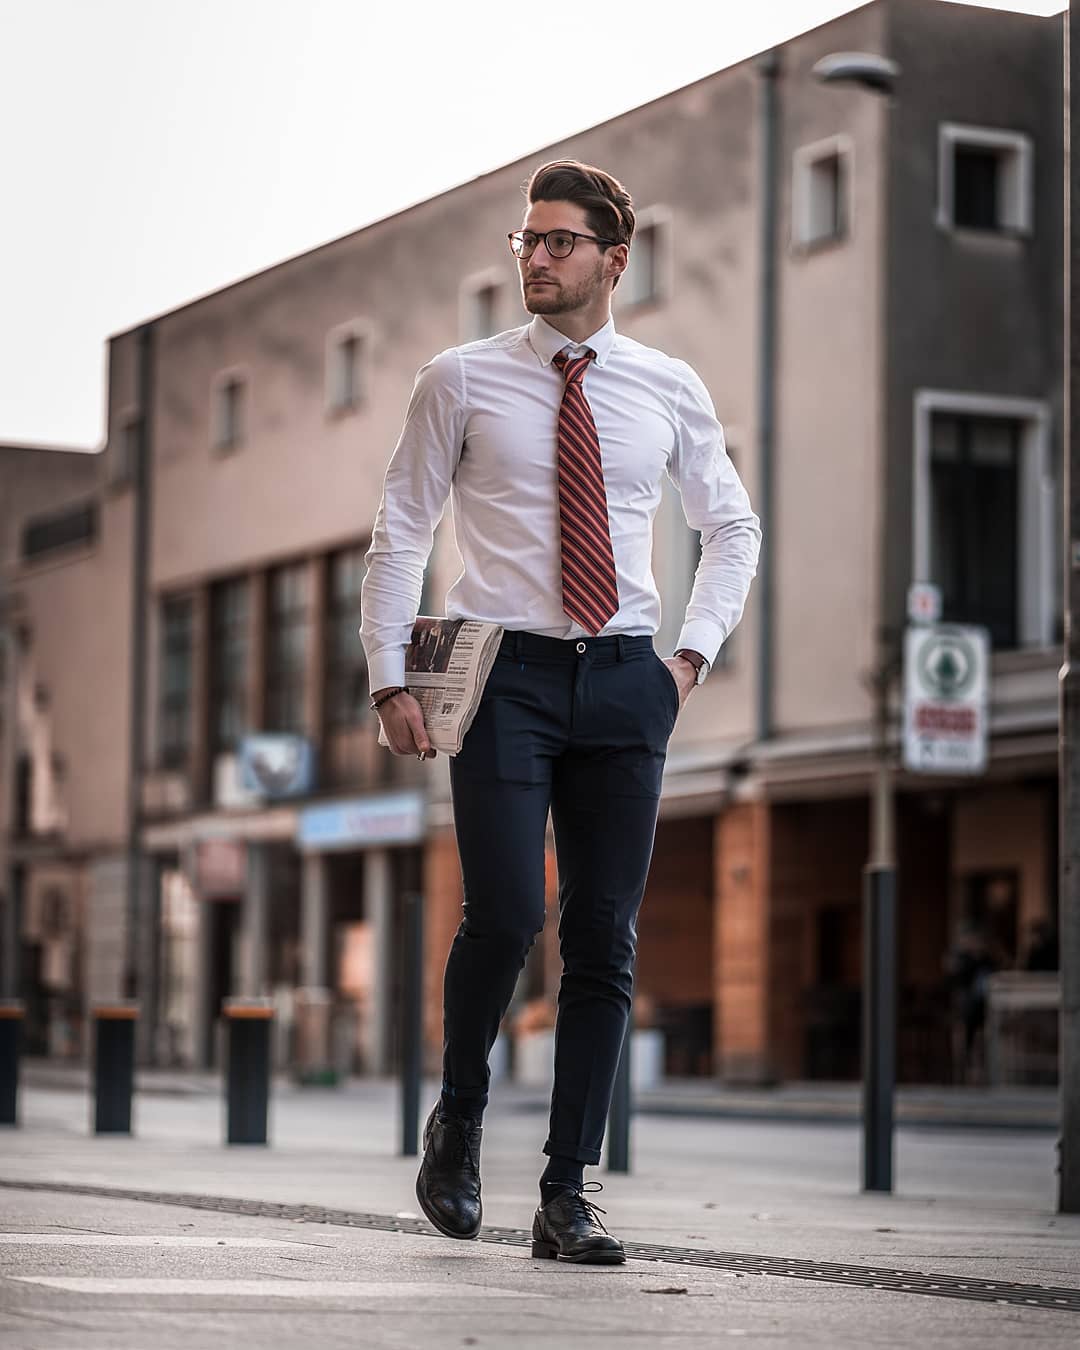 White Shirt Men - Fashion Inspiration and Discovery